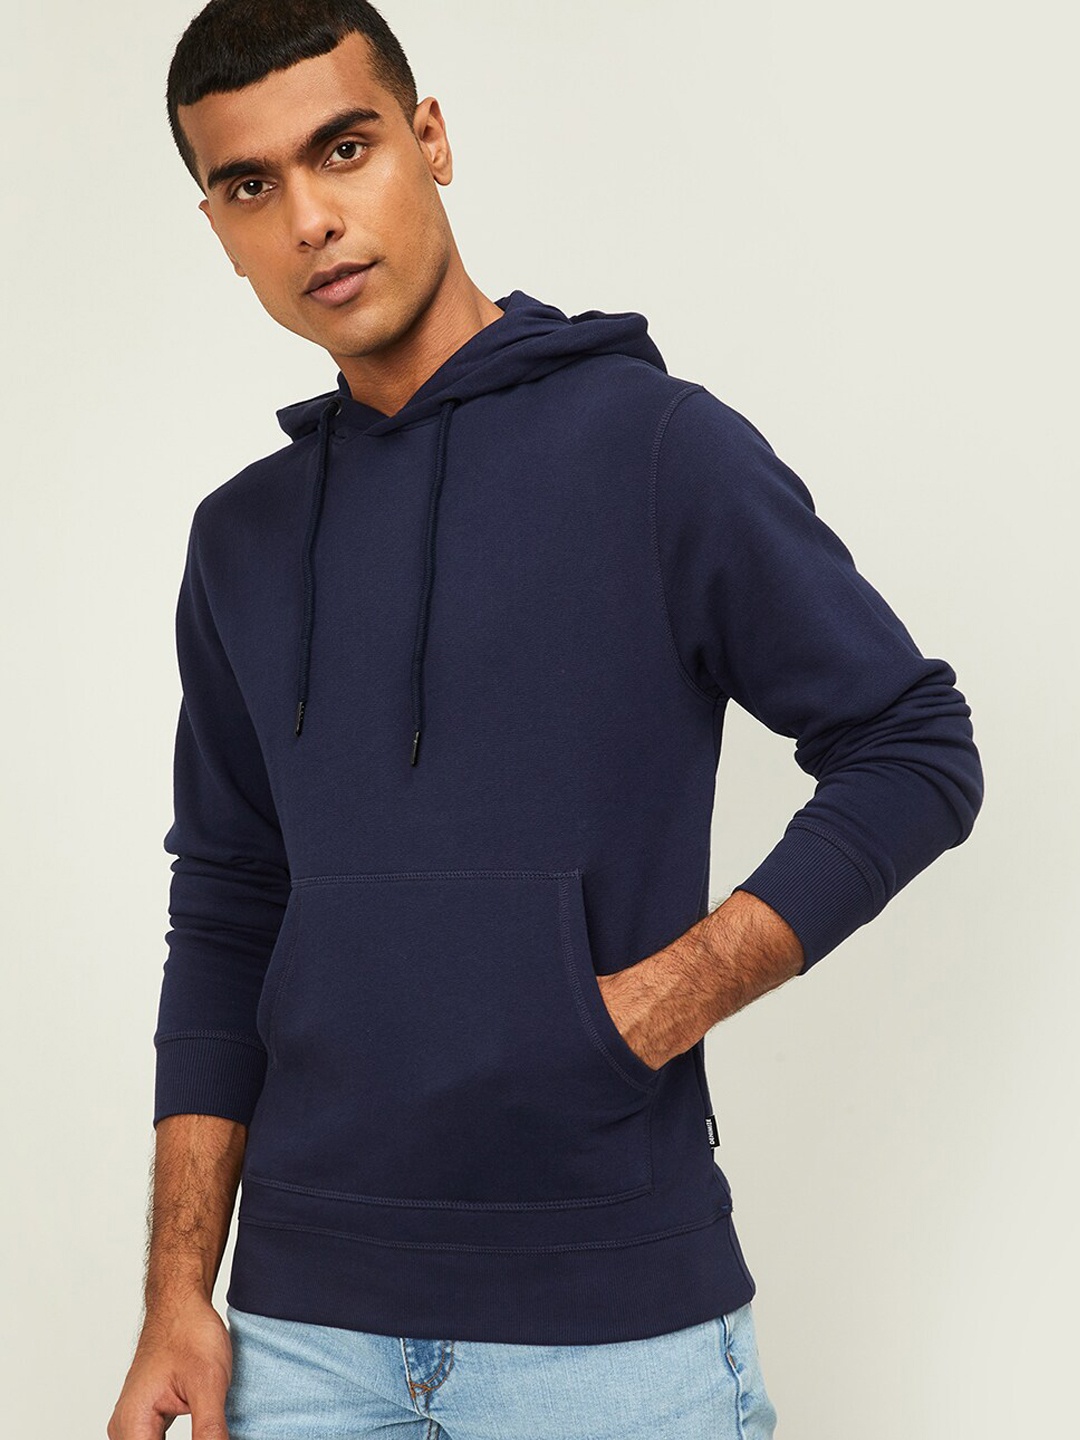 Denimize by Fame Forever Men Navy Blue Hooded Sweatshirt - buy at the ...